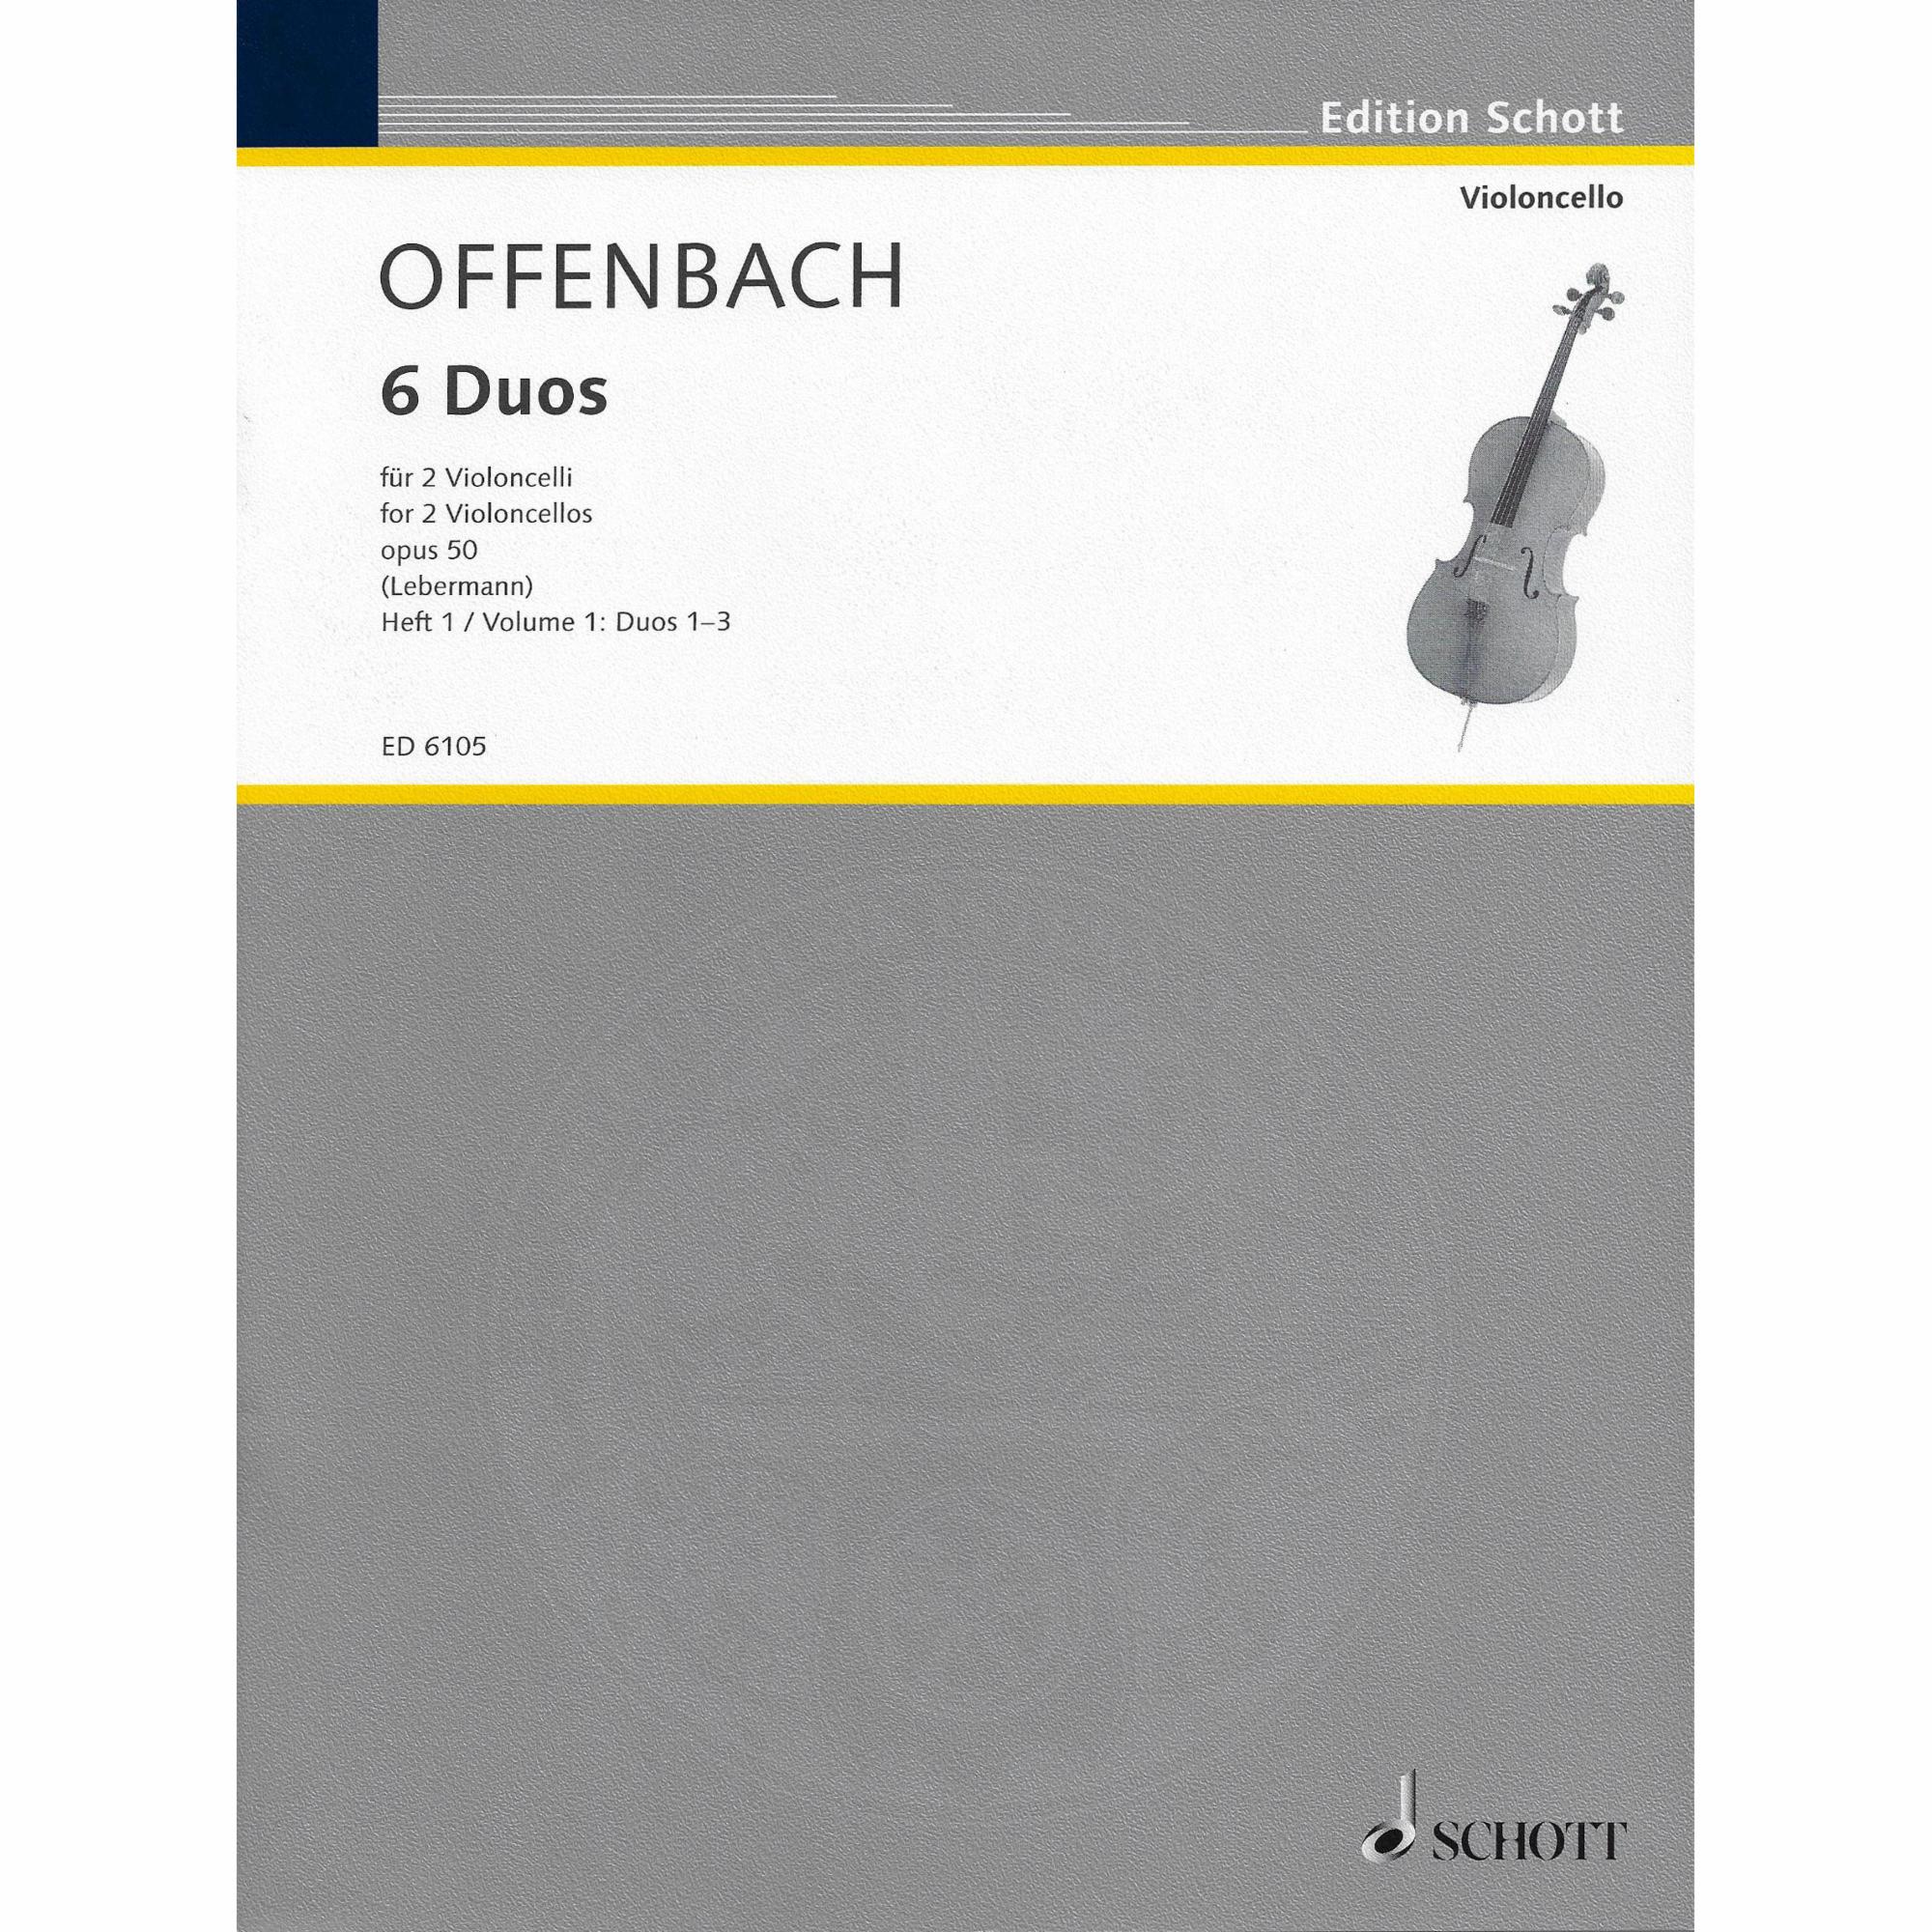 Offenbach -- 6 Duos, Op. 50, Vols. 1-2 for Two Cellos